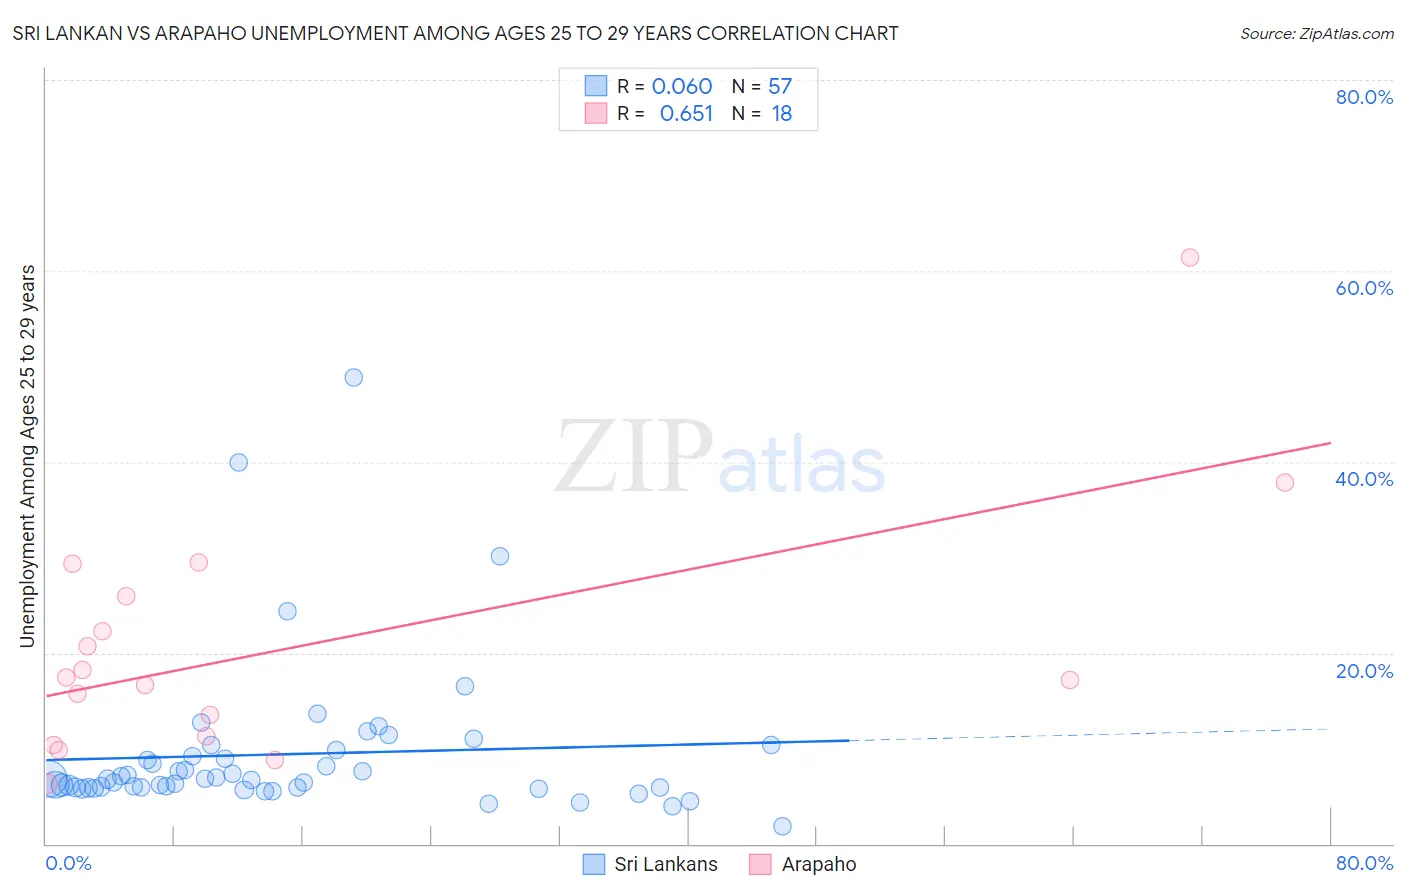 Sri Lankan vs Arapaho Unemployment Among Ages 25 to 29 years